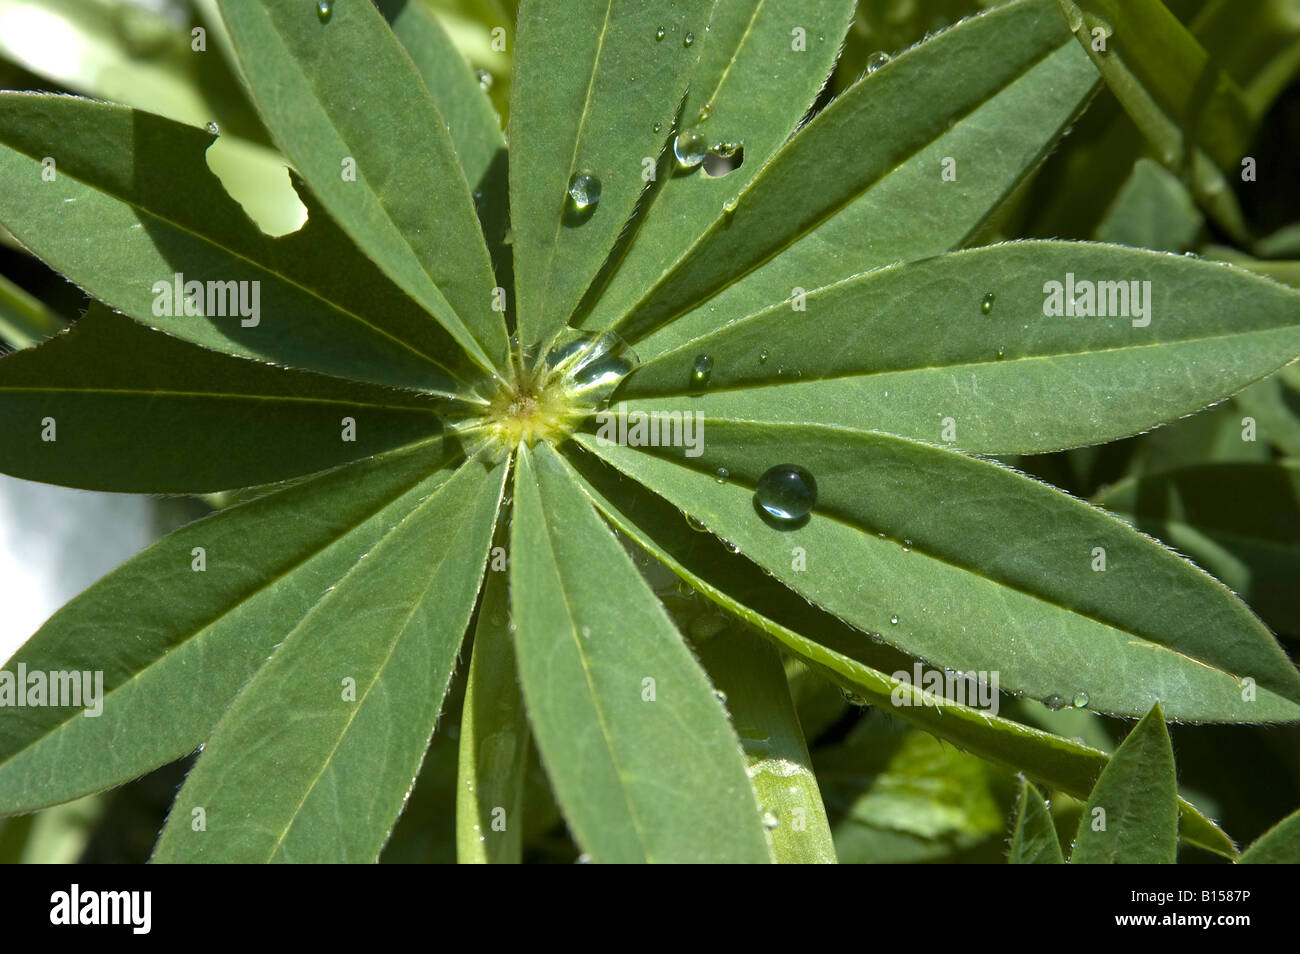 Water droplets on lupin leaf Stock Photo